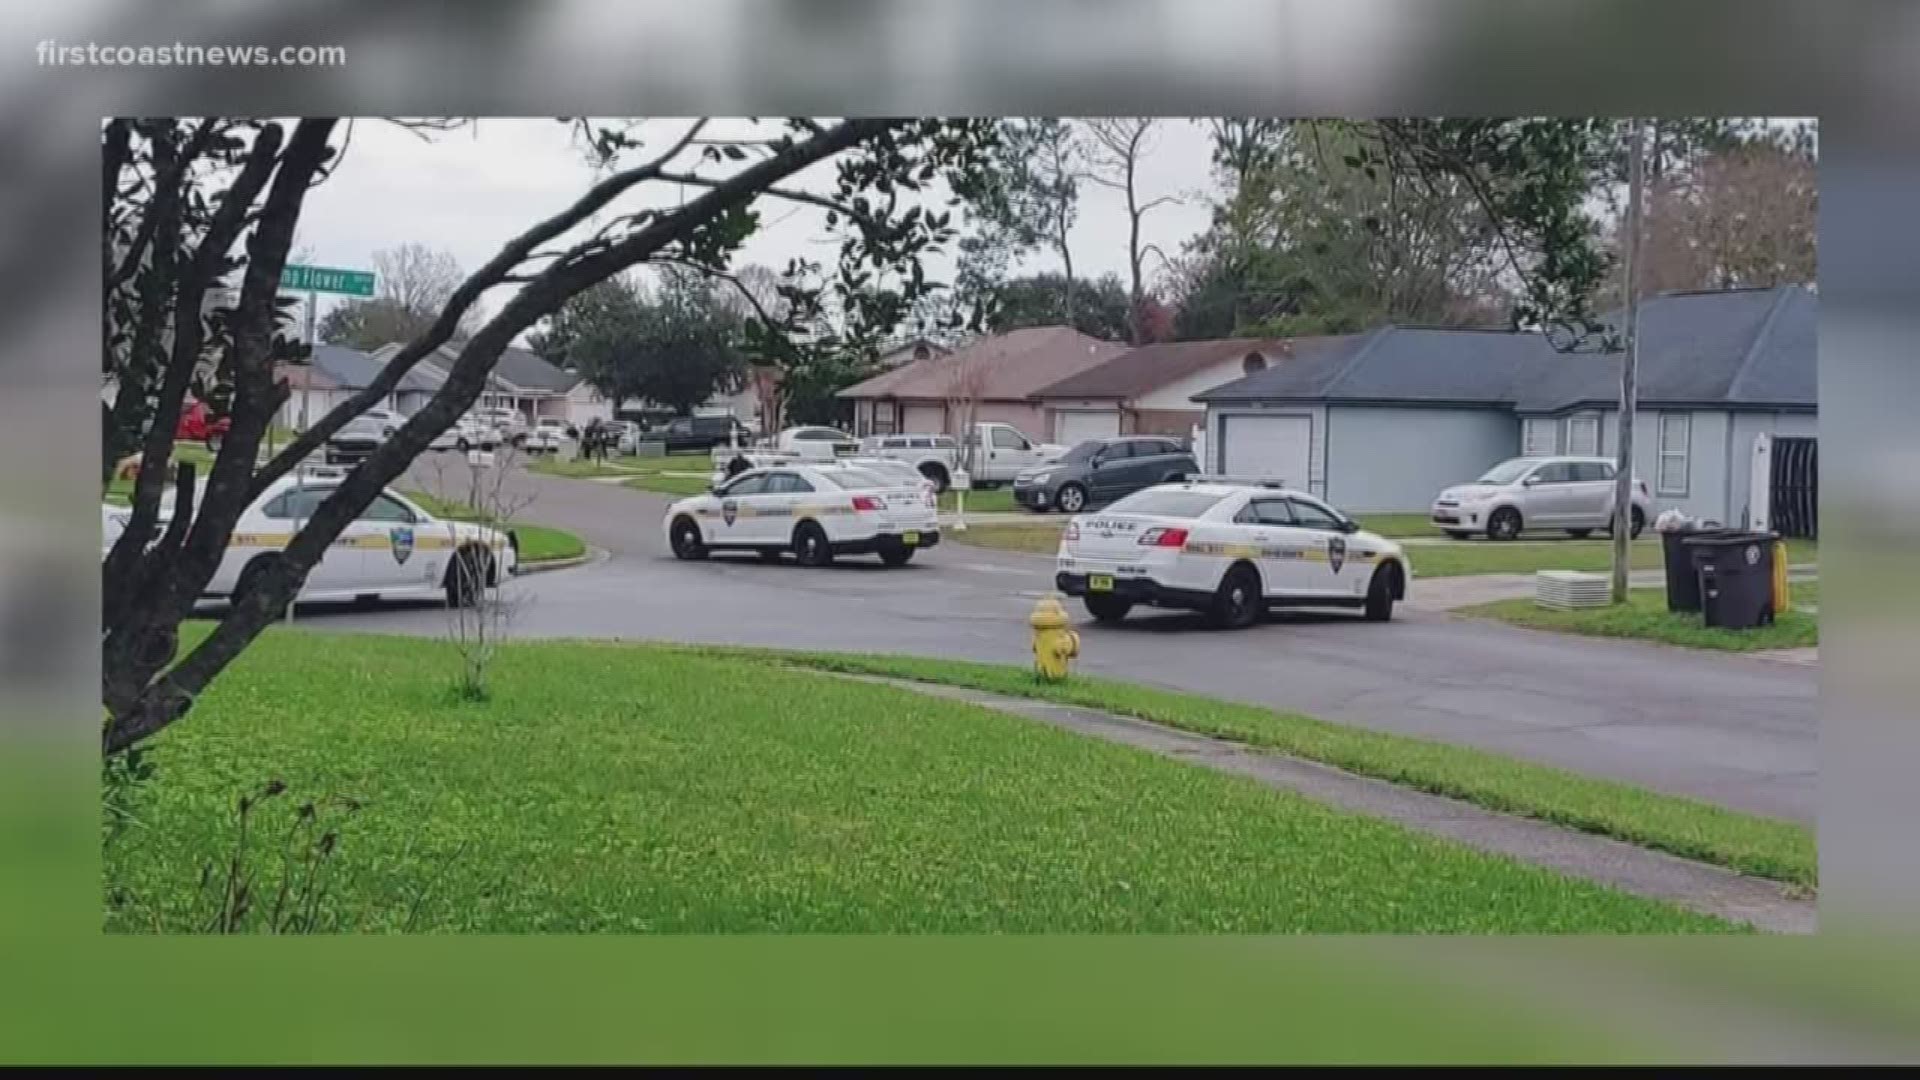 At least five JSO patrol cars can be seen at an Argyle Forest neighborhood located at the intersection of Swamp Flower Drive and Eagles Perch Drive.